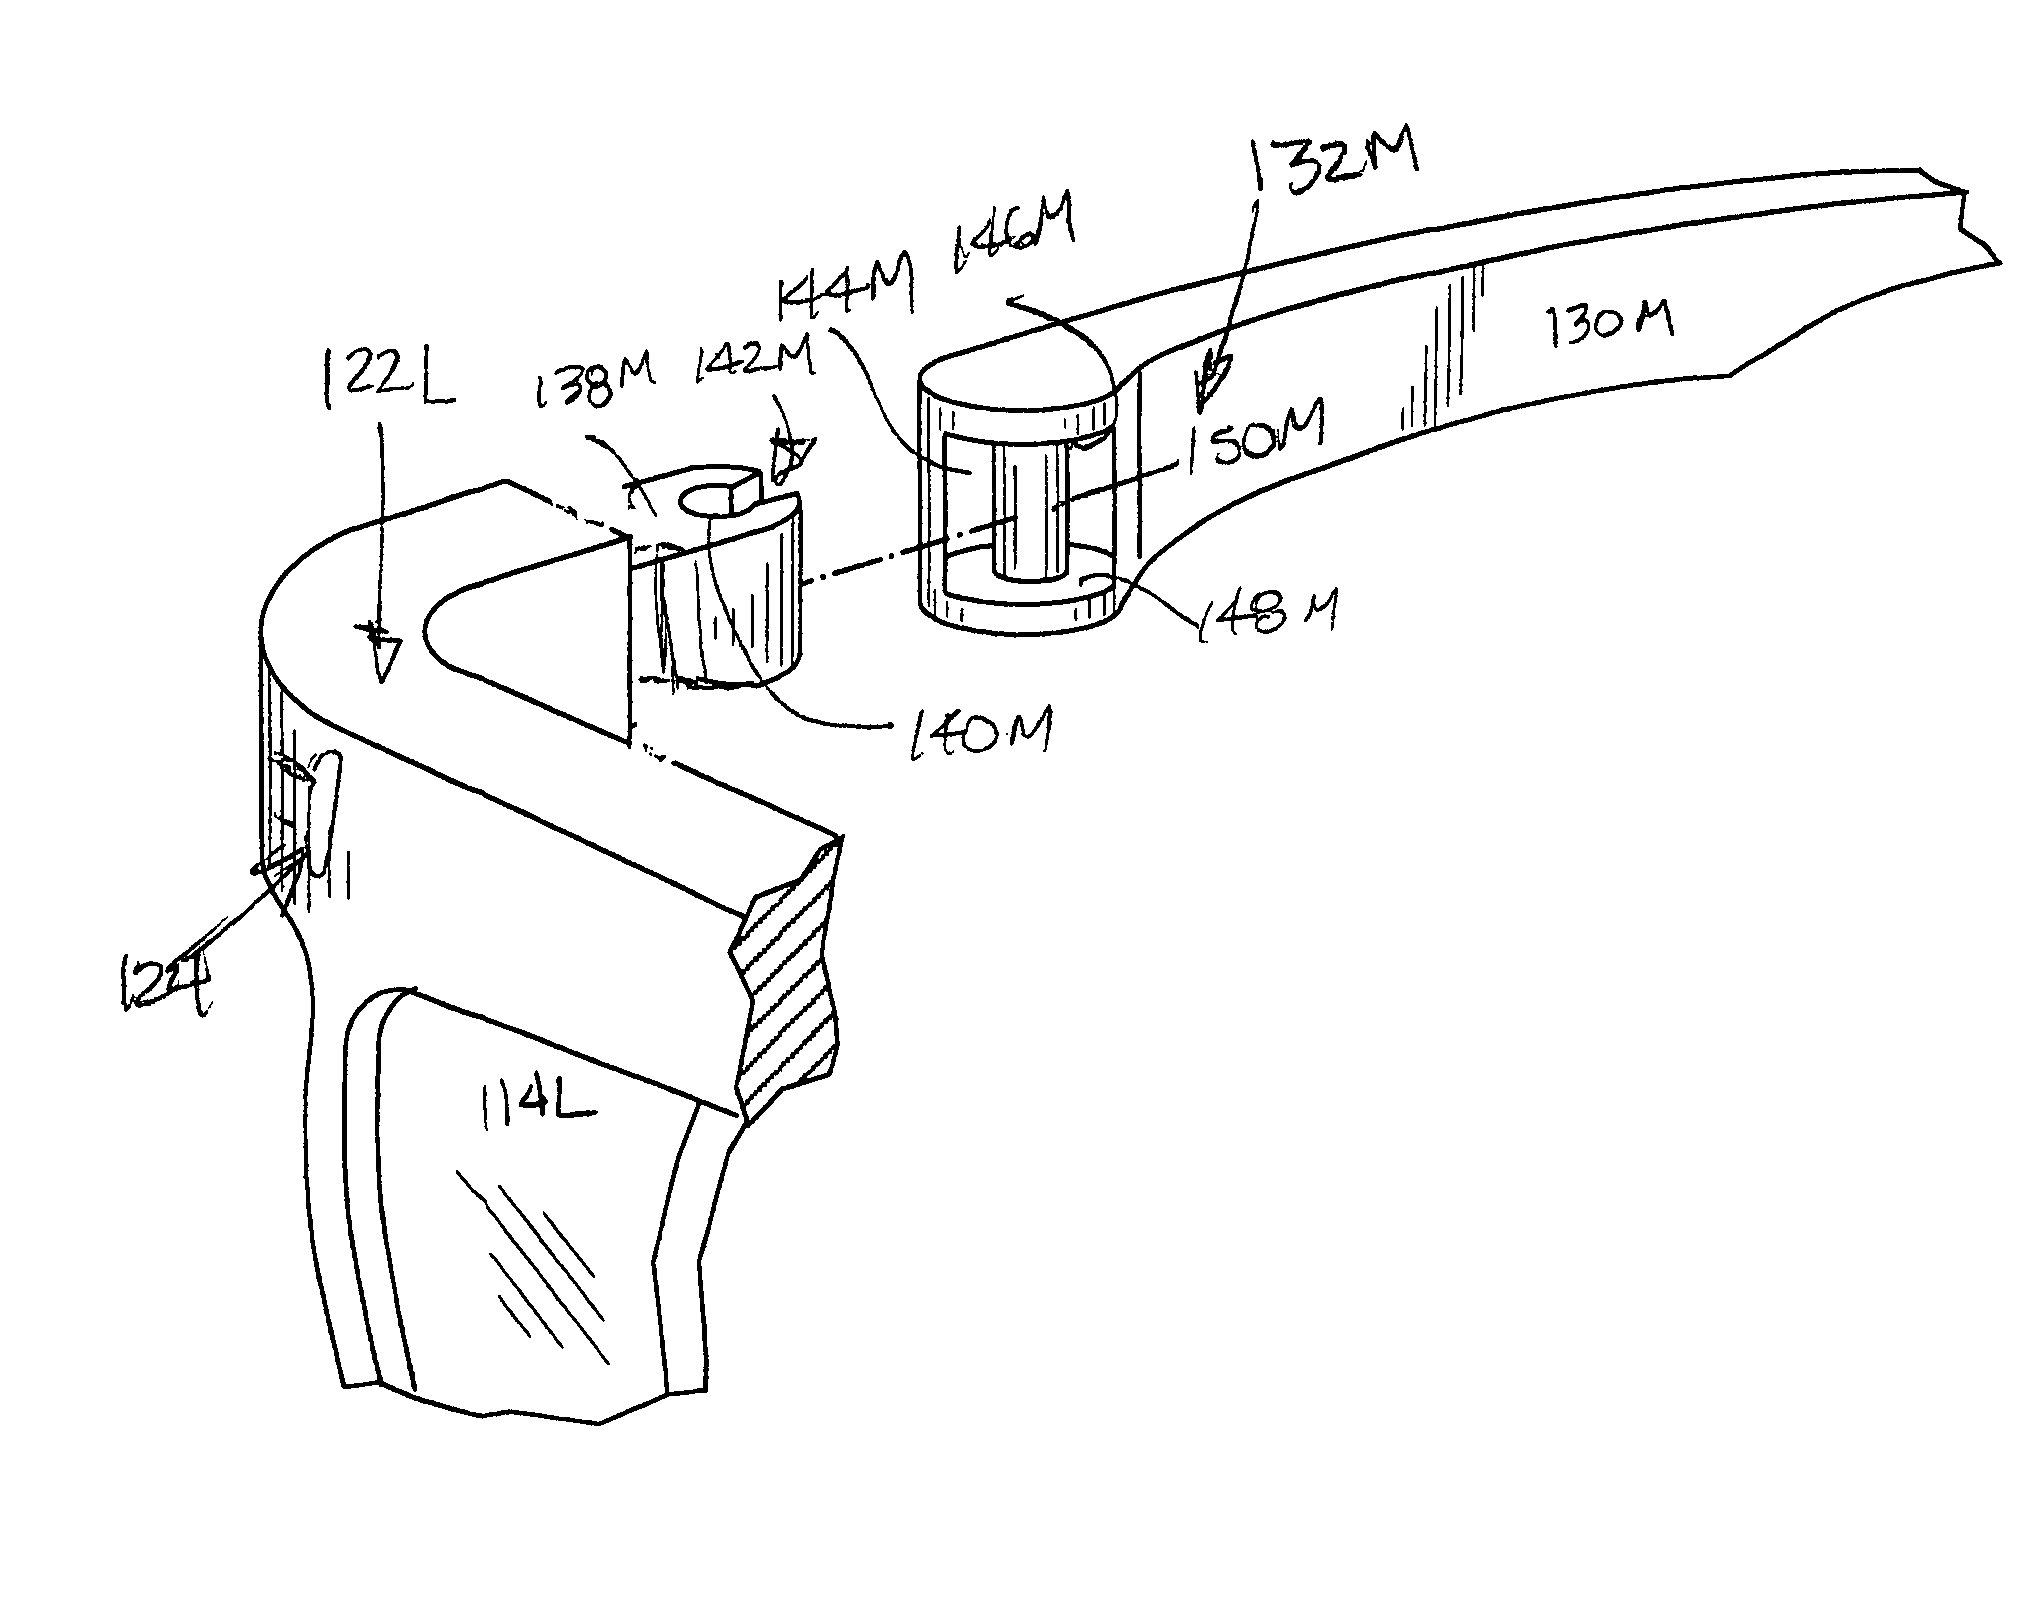 Frame hinge and side arm, eyeglass frame with multiple wearer connections and improved spectacle kit